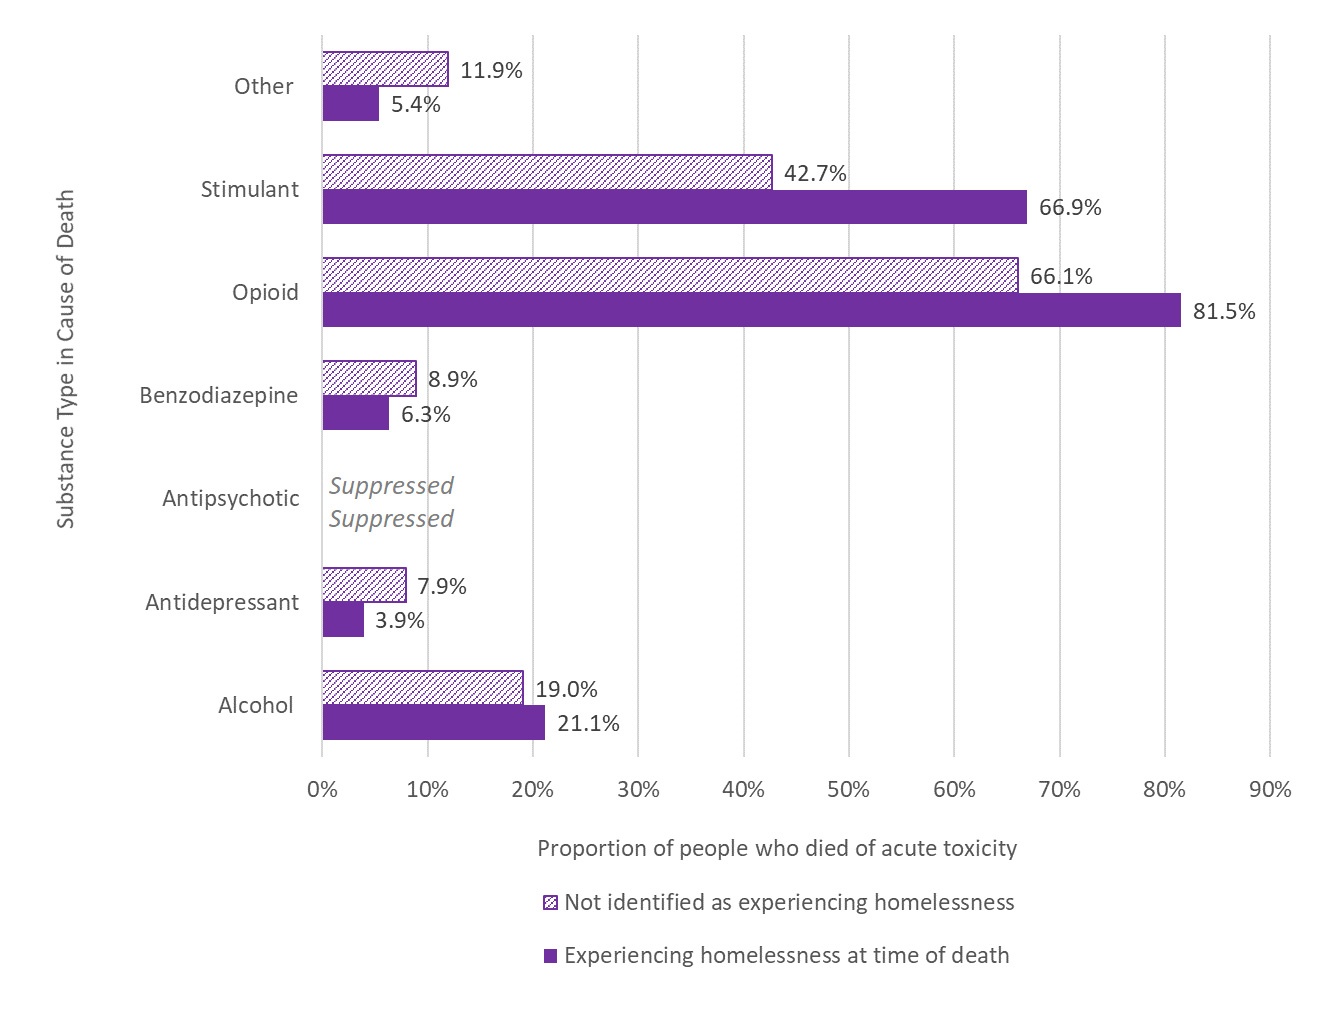 Figure 1. Proportion of people who died of acute toxicity in 2016 or 2017 by housing situation and substance types identified as a cause of death